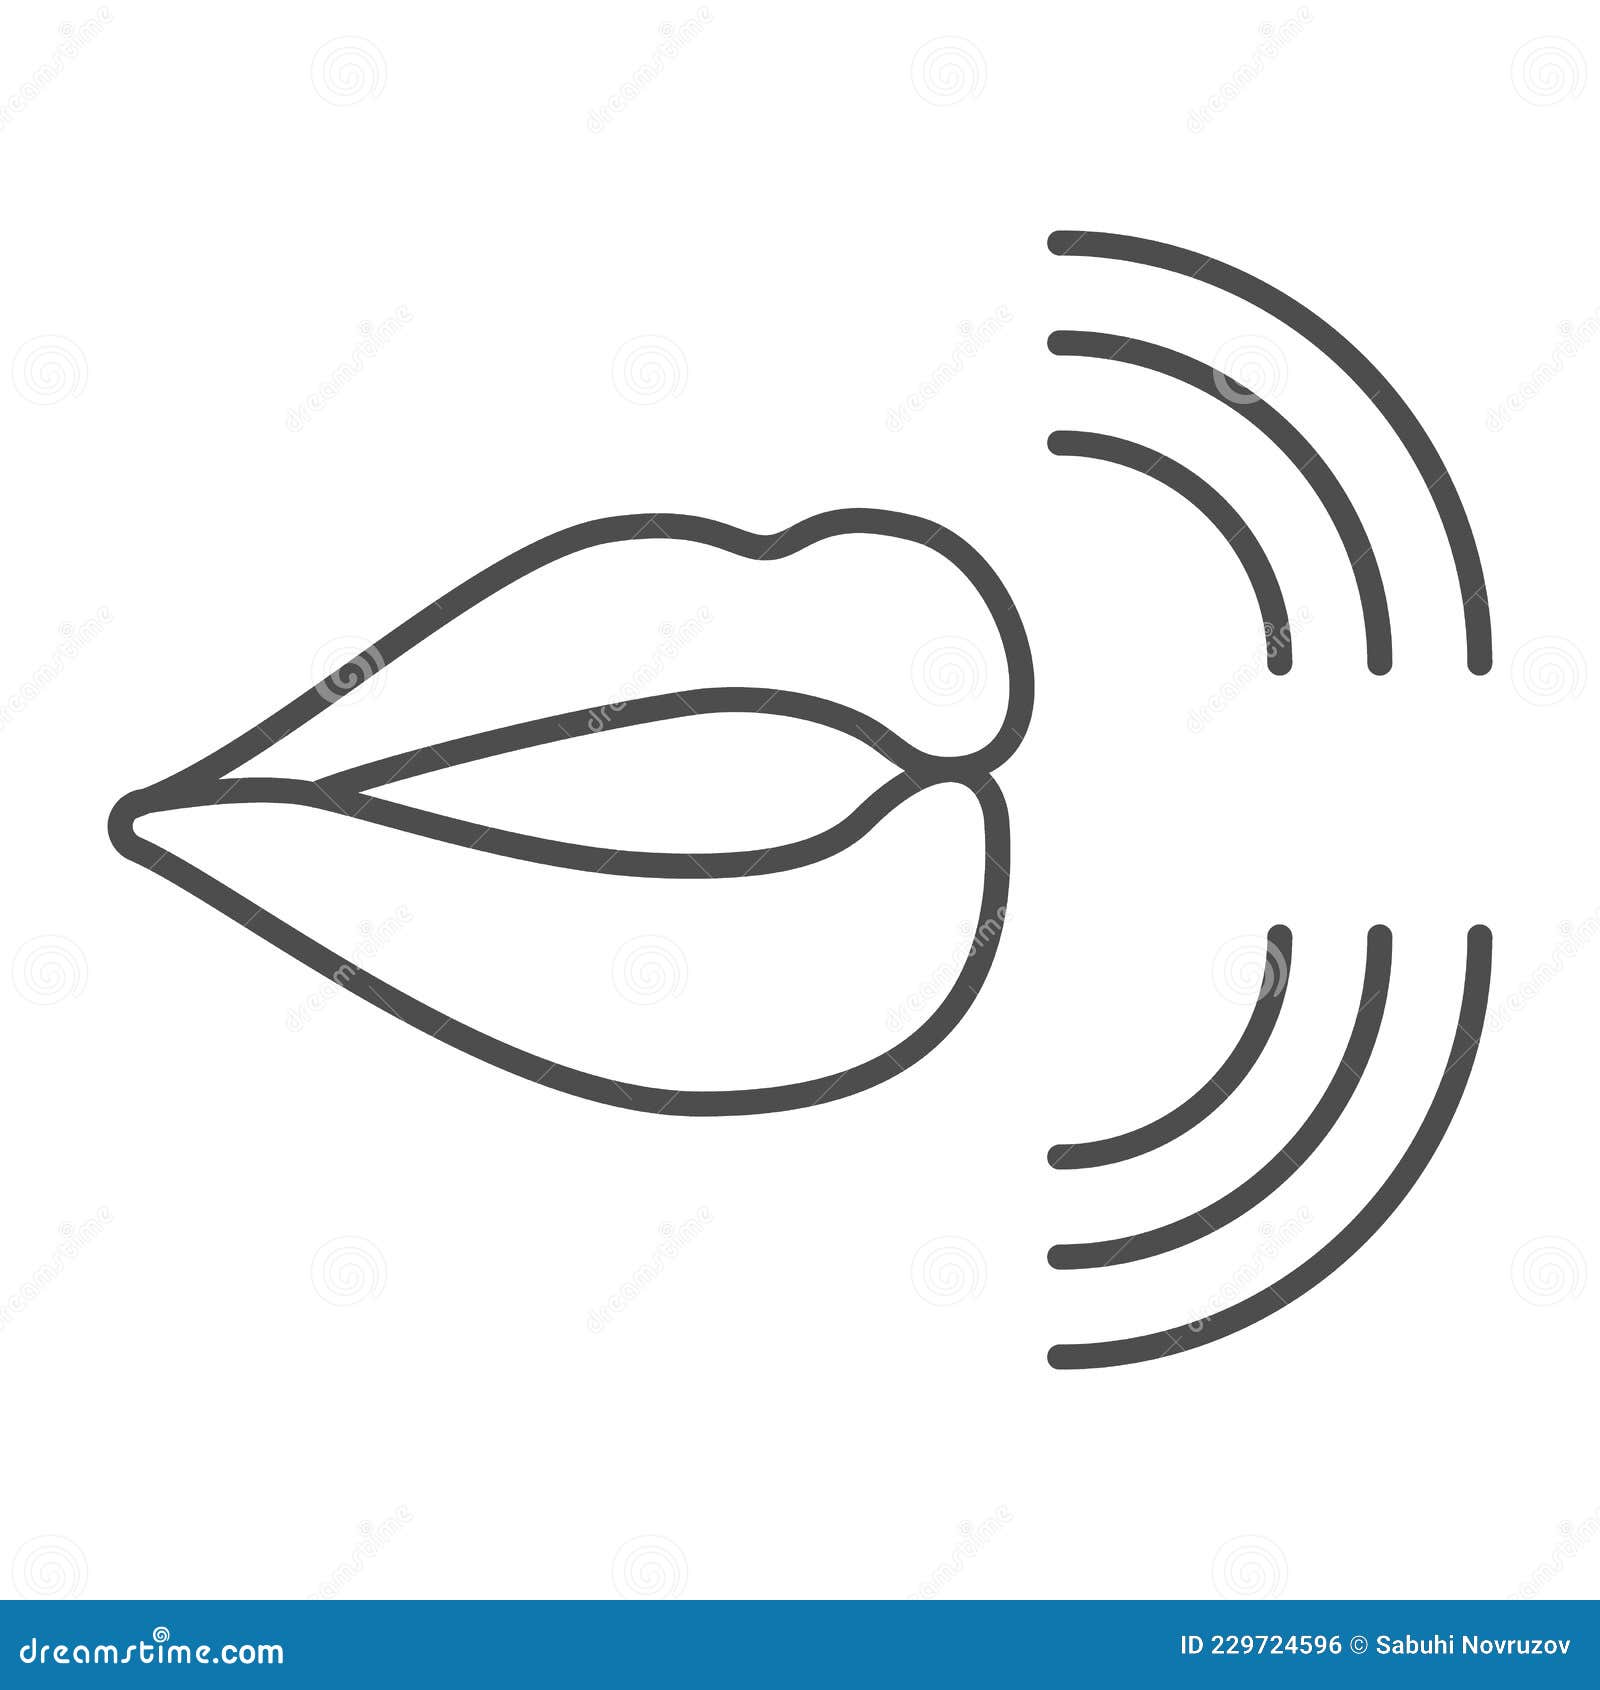 mouth, lips, pronunciation of sounds thin line icon, linguistics concept, phonetics speech  sign on white